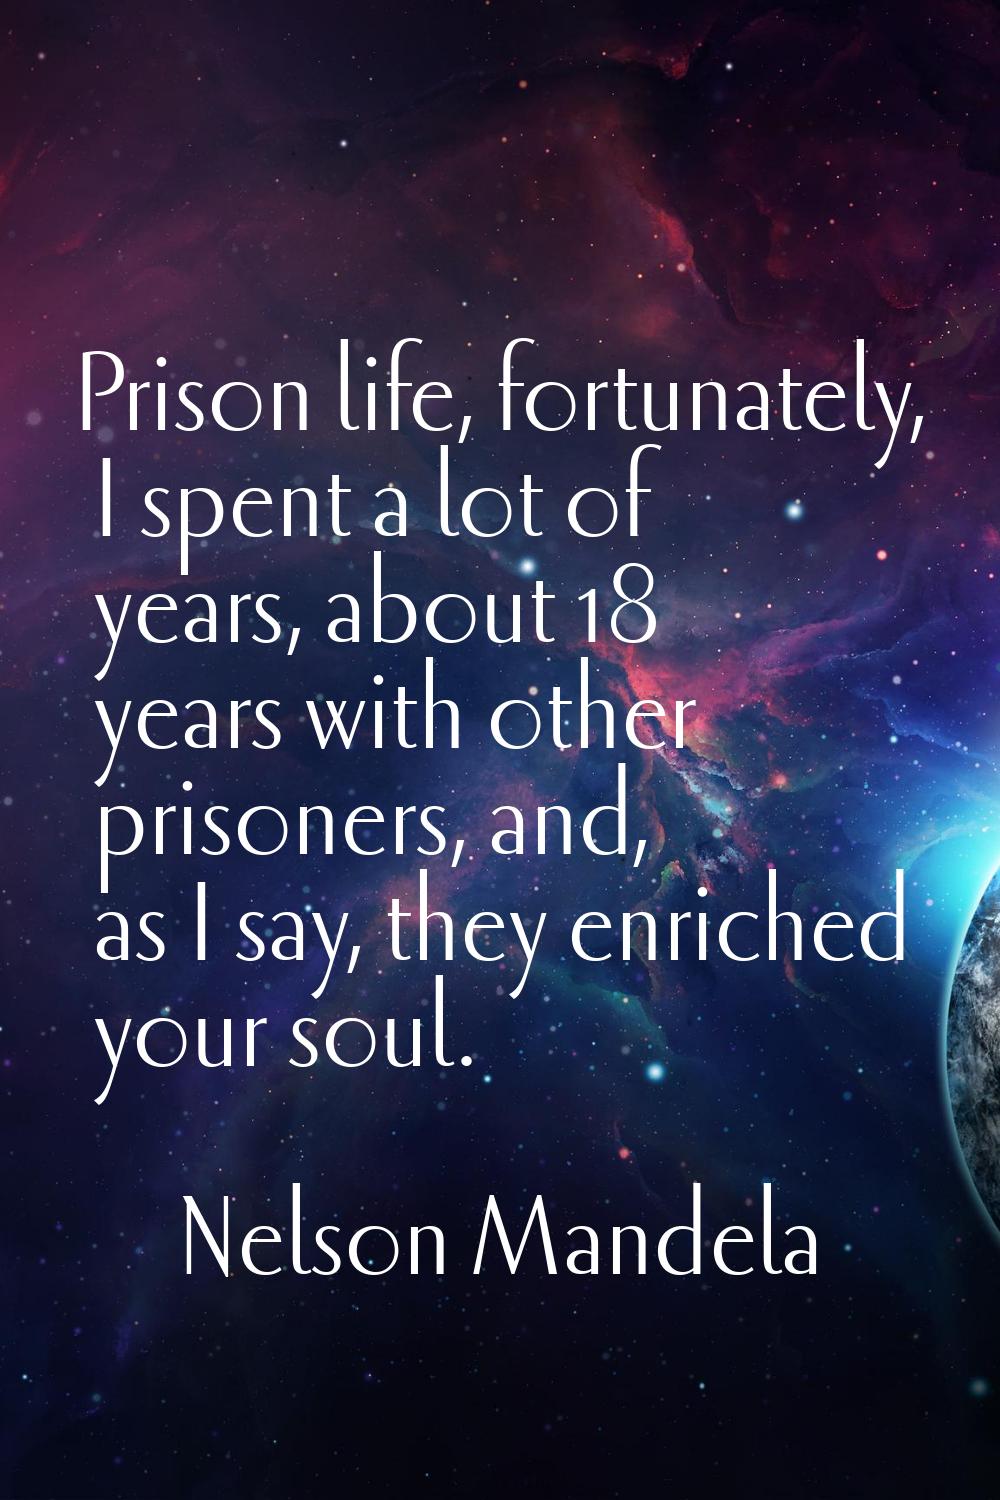 Prison life, fortunately, I spent a lot of years, about 18 years with other prisoners, and, as I sa